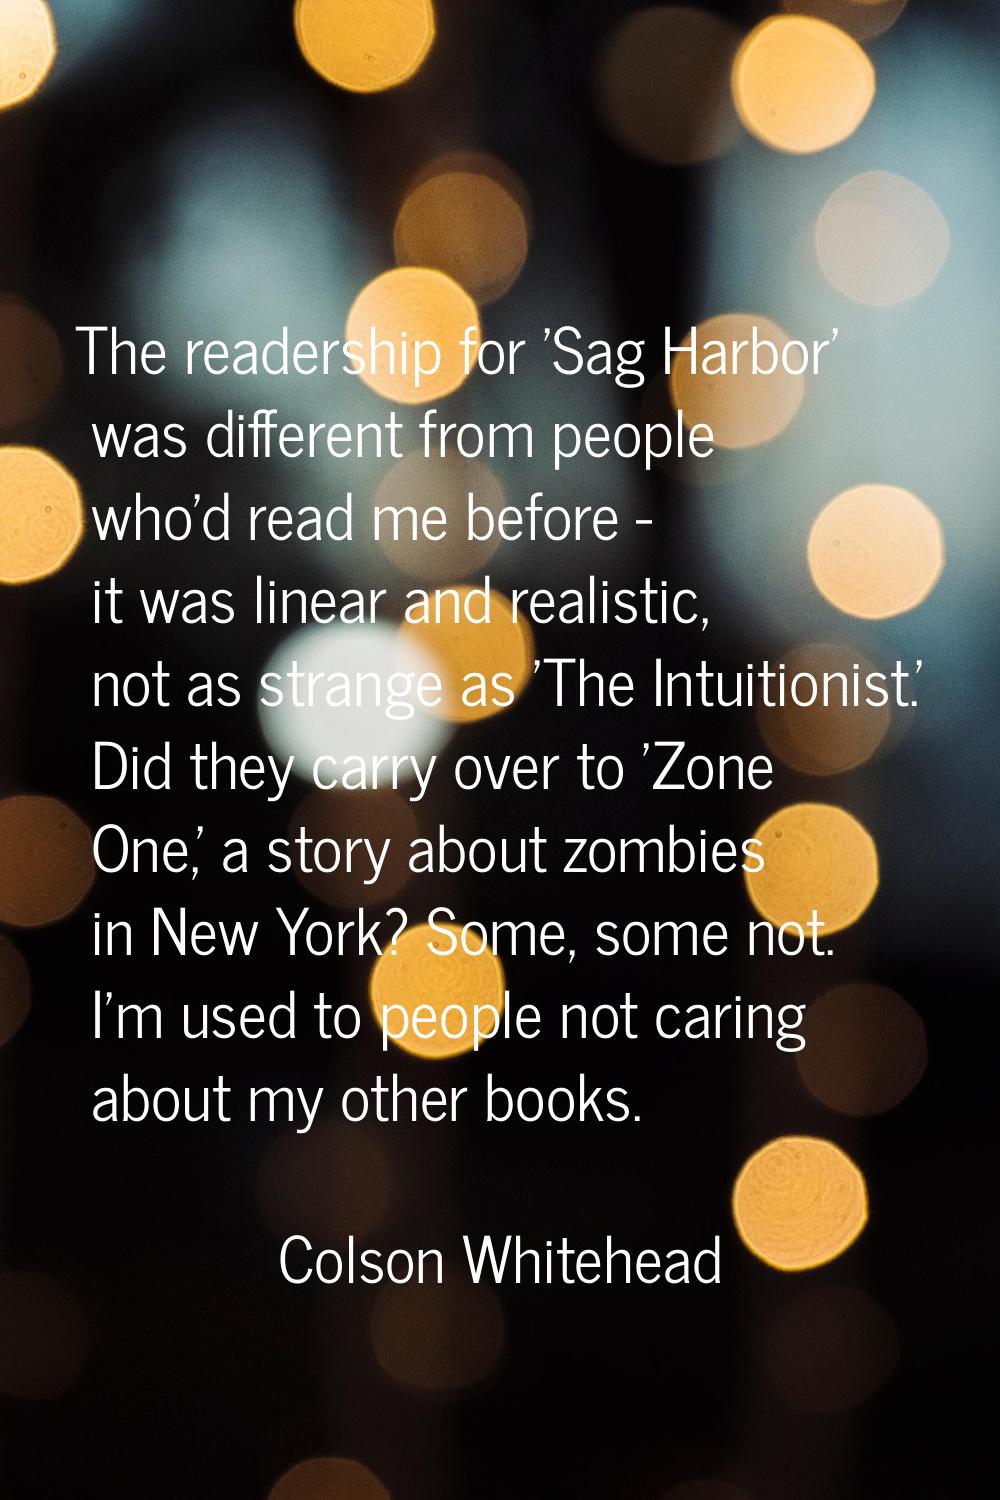 The readership for 'Sag Harbor' was different from people who'd read me before - it was linear and 